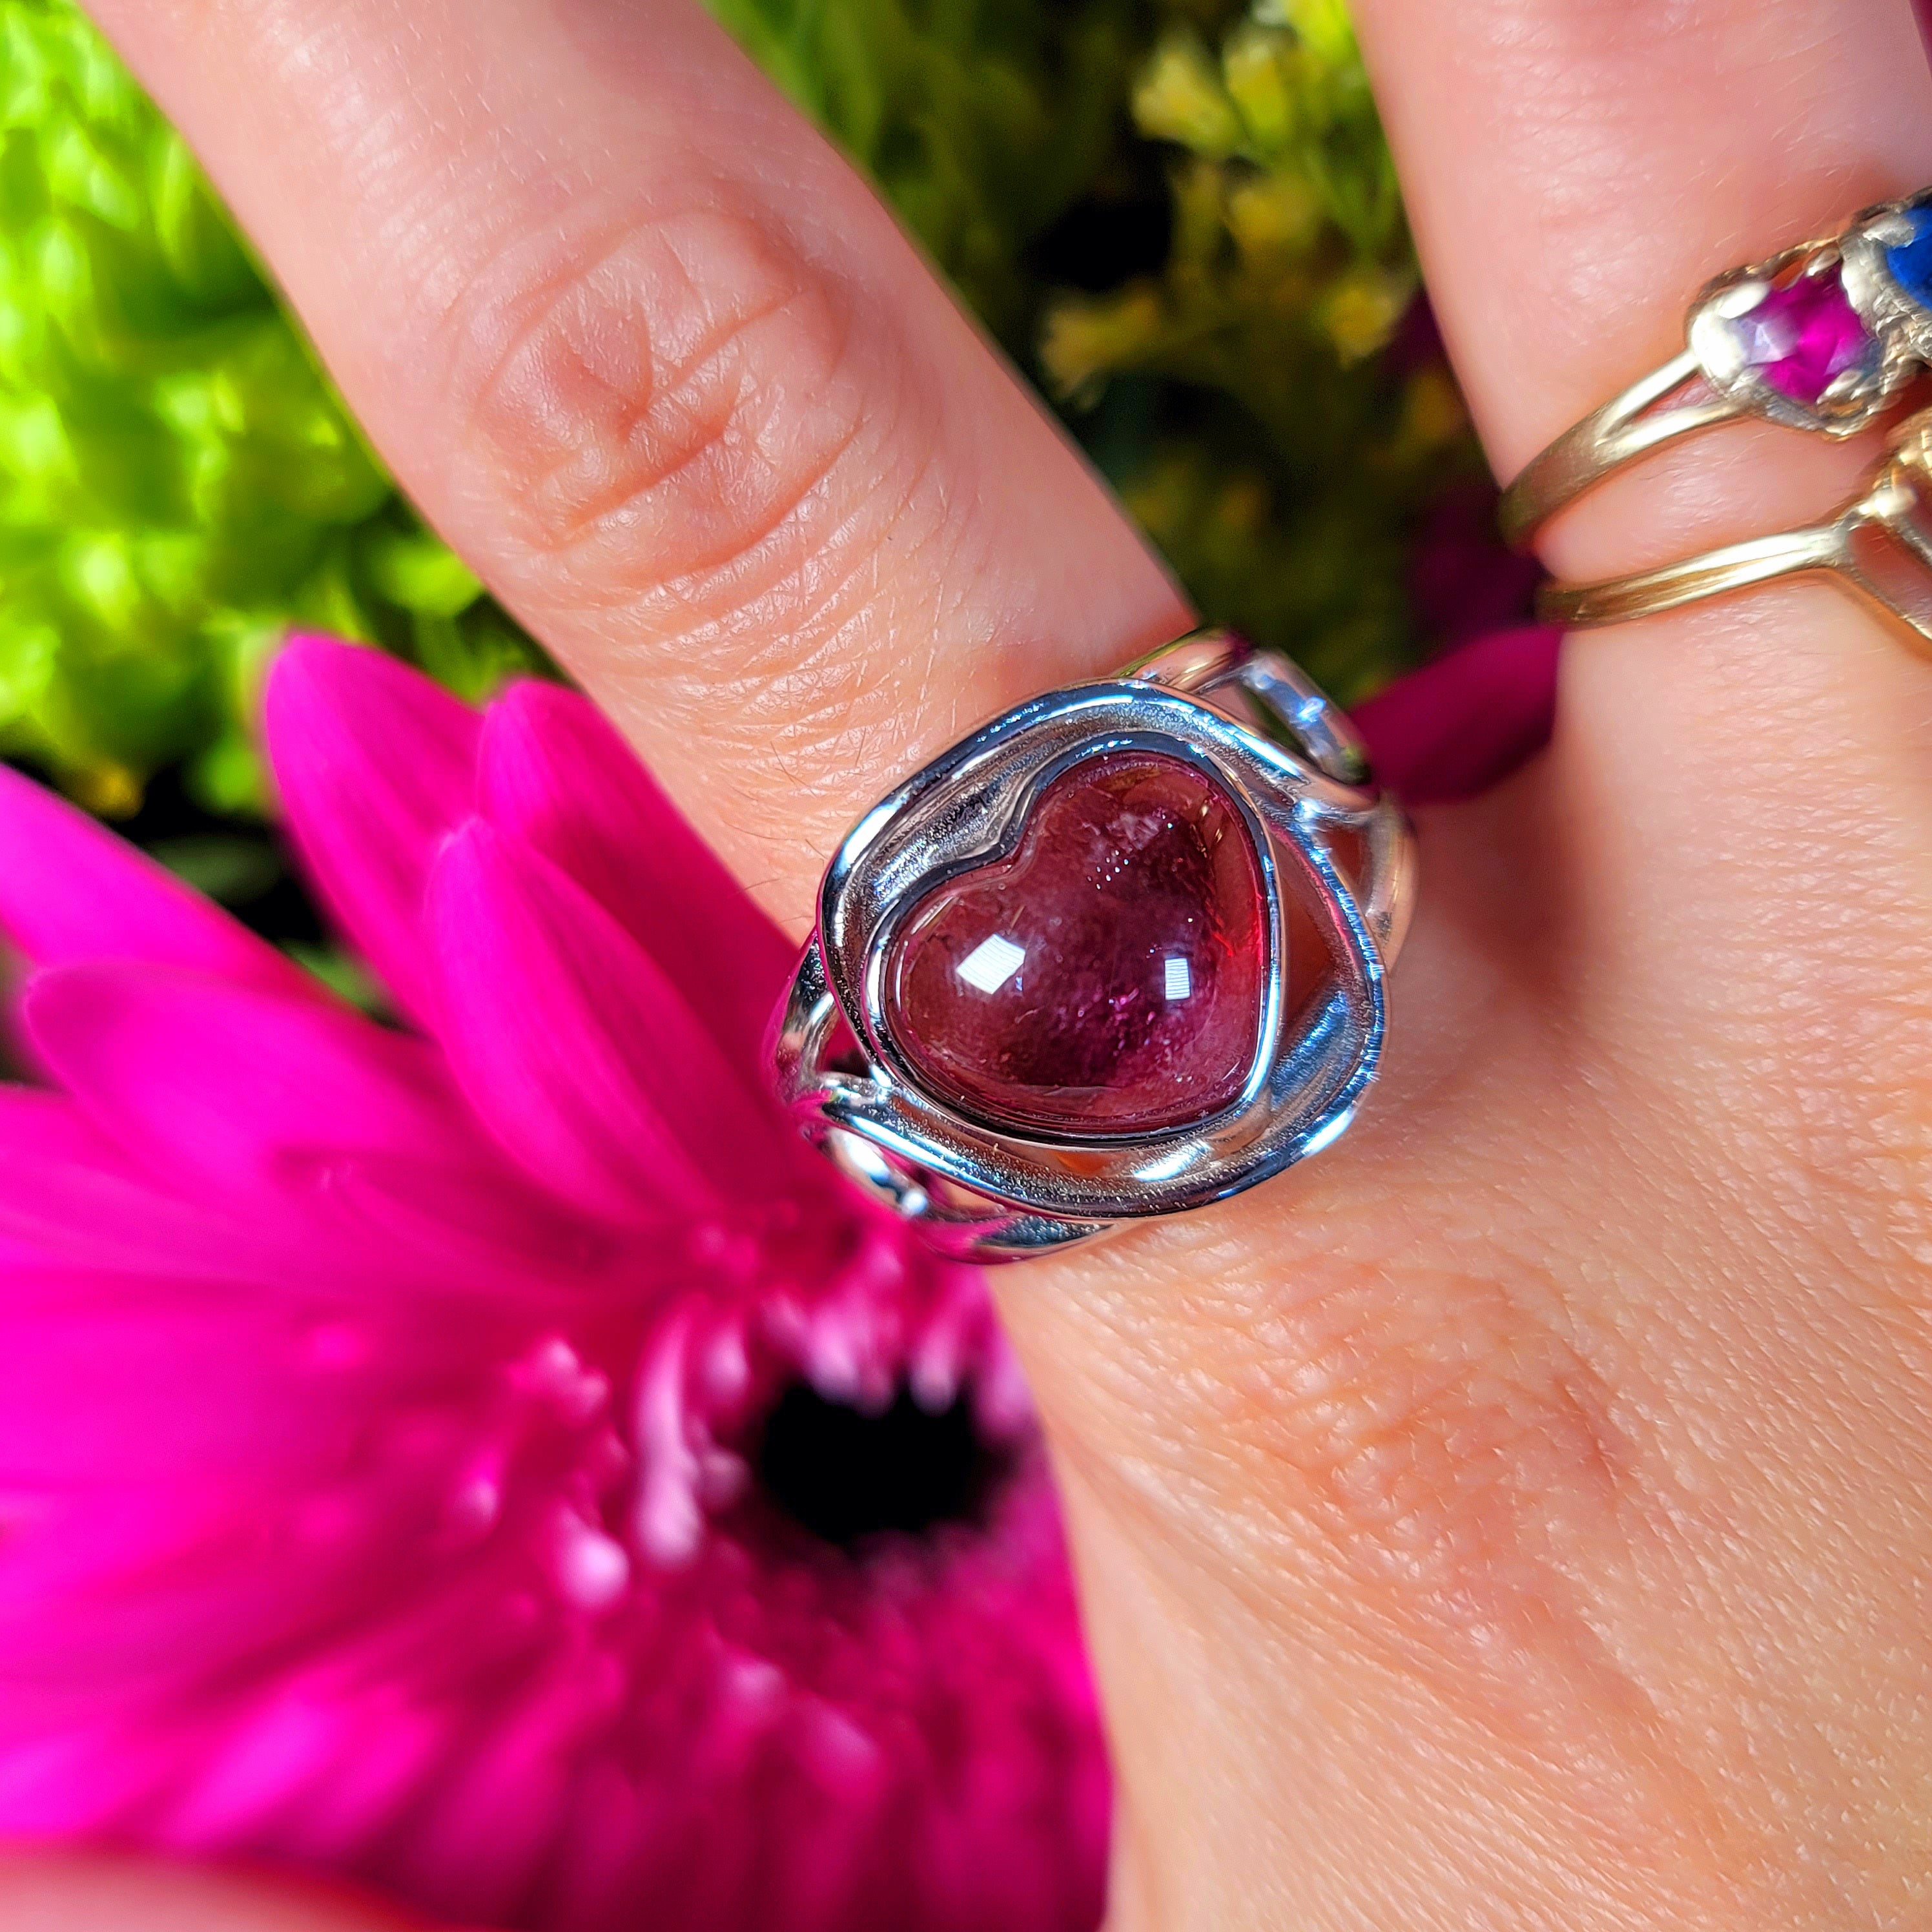 Watermelon Tourmaline Heart Adjustable Finger Cuff Ring .925 Silver for Healing, Joy and Love